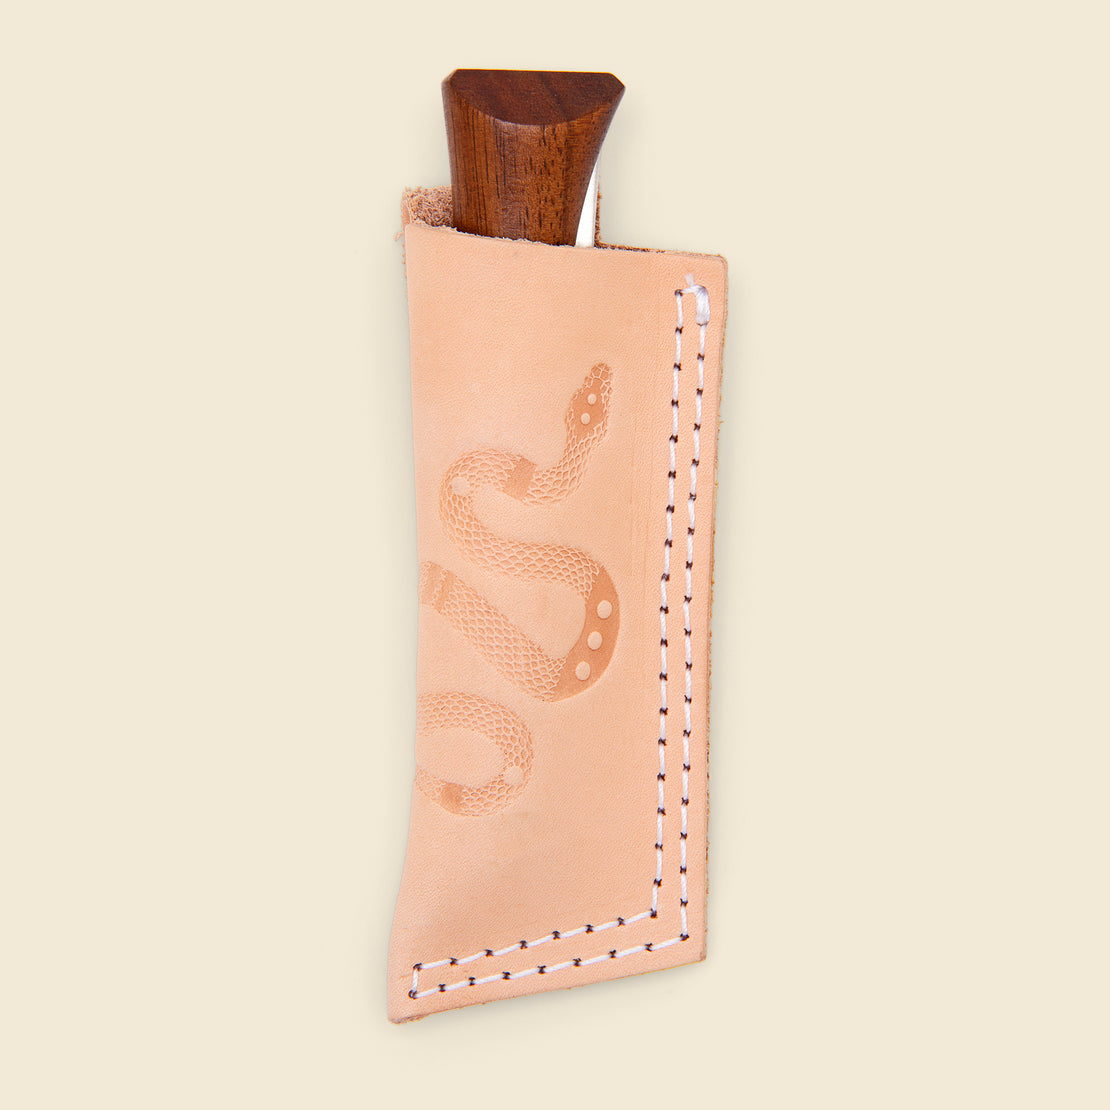 Son of a Sailor Leather Sheath with Opinel Knife - Natural Snake Stamped